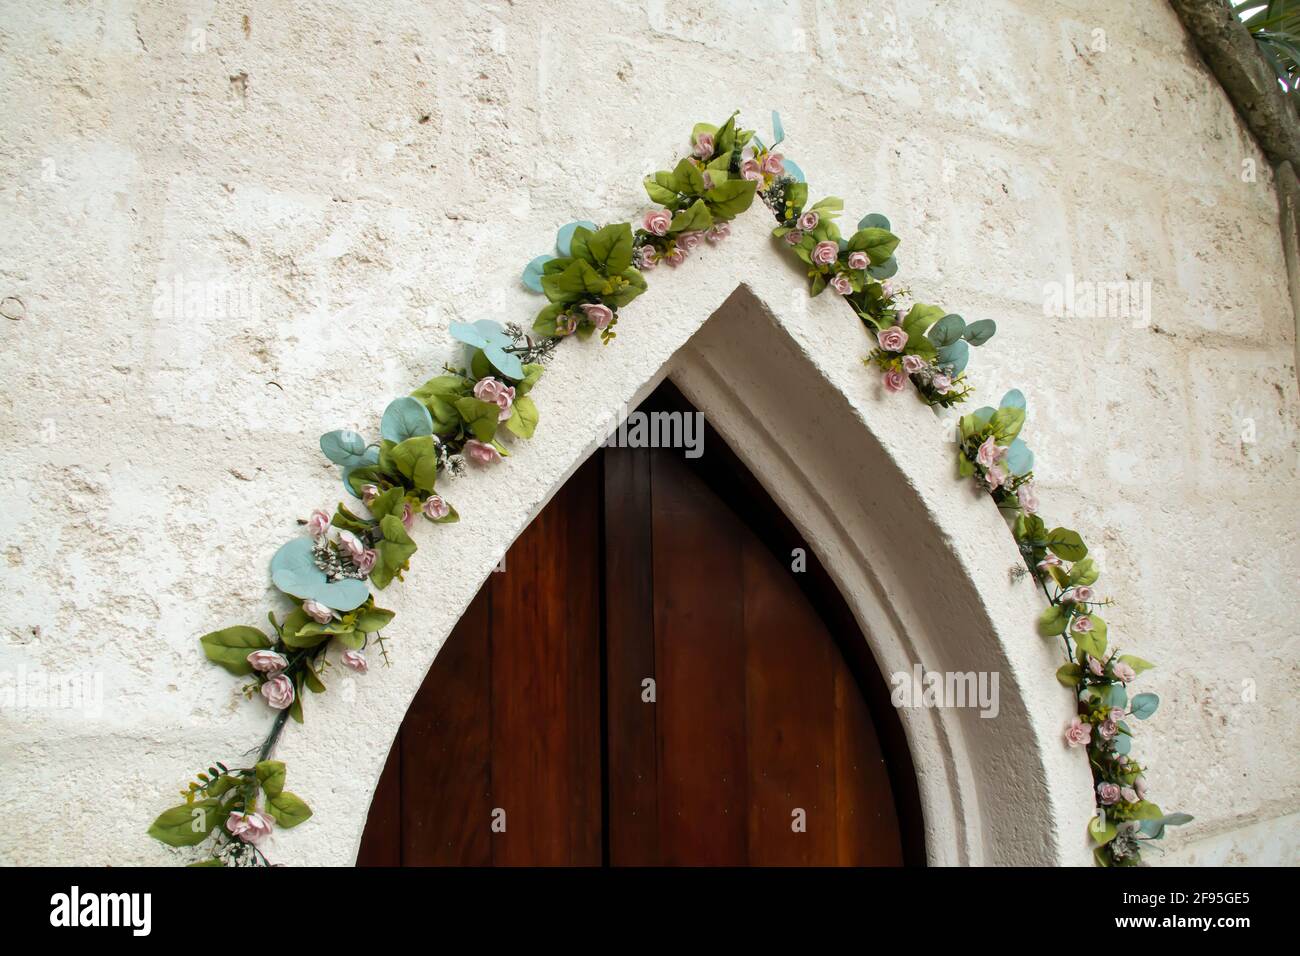 A slightly ajar old-fashioned medieval frame door in Barbados, surrounded by climbing green ivy vines with blossoms and old-fashioned colonial church. Stock Photo